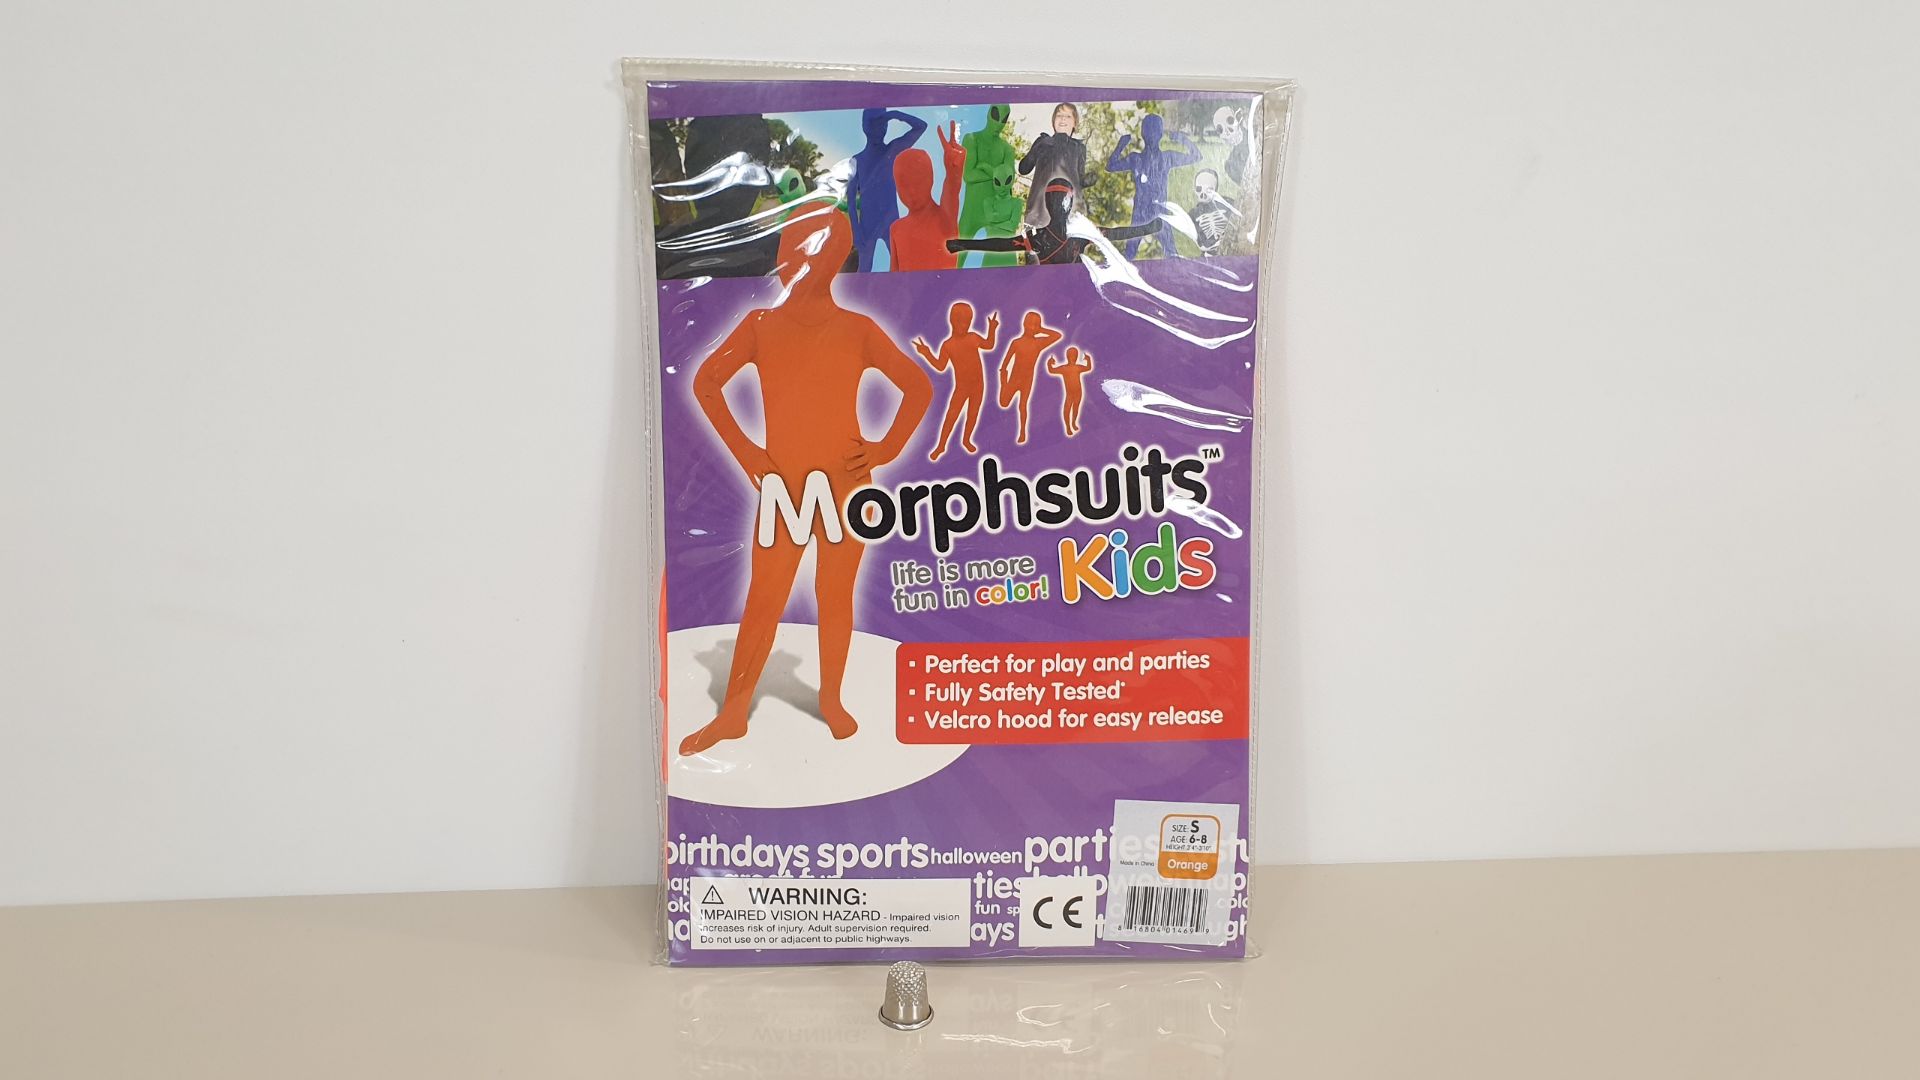 20 X ORANGE KIDS MORPH SUITS - SIZE S (SUGGESTED 6-8 YEARS - HEIGHT 3'4"-3'10")